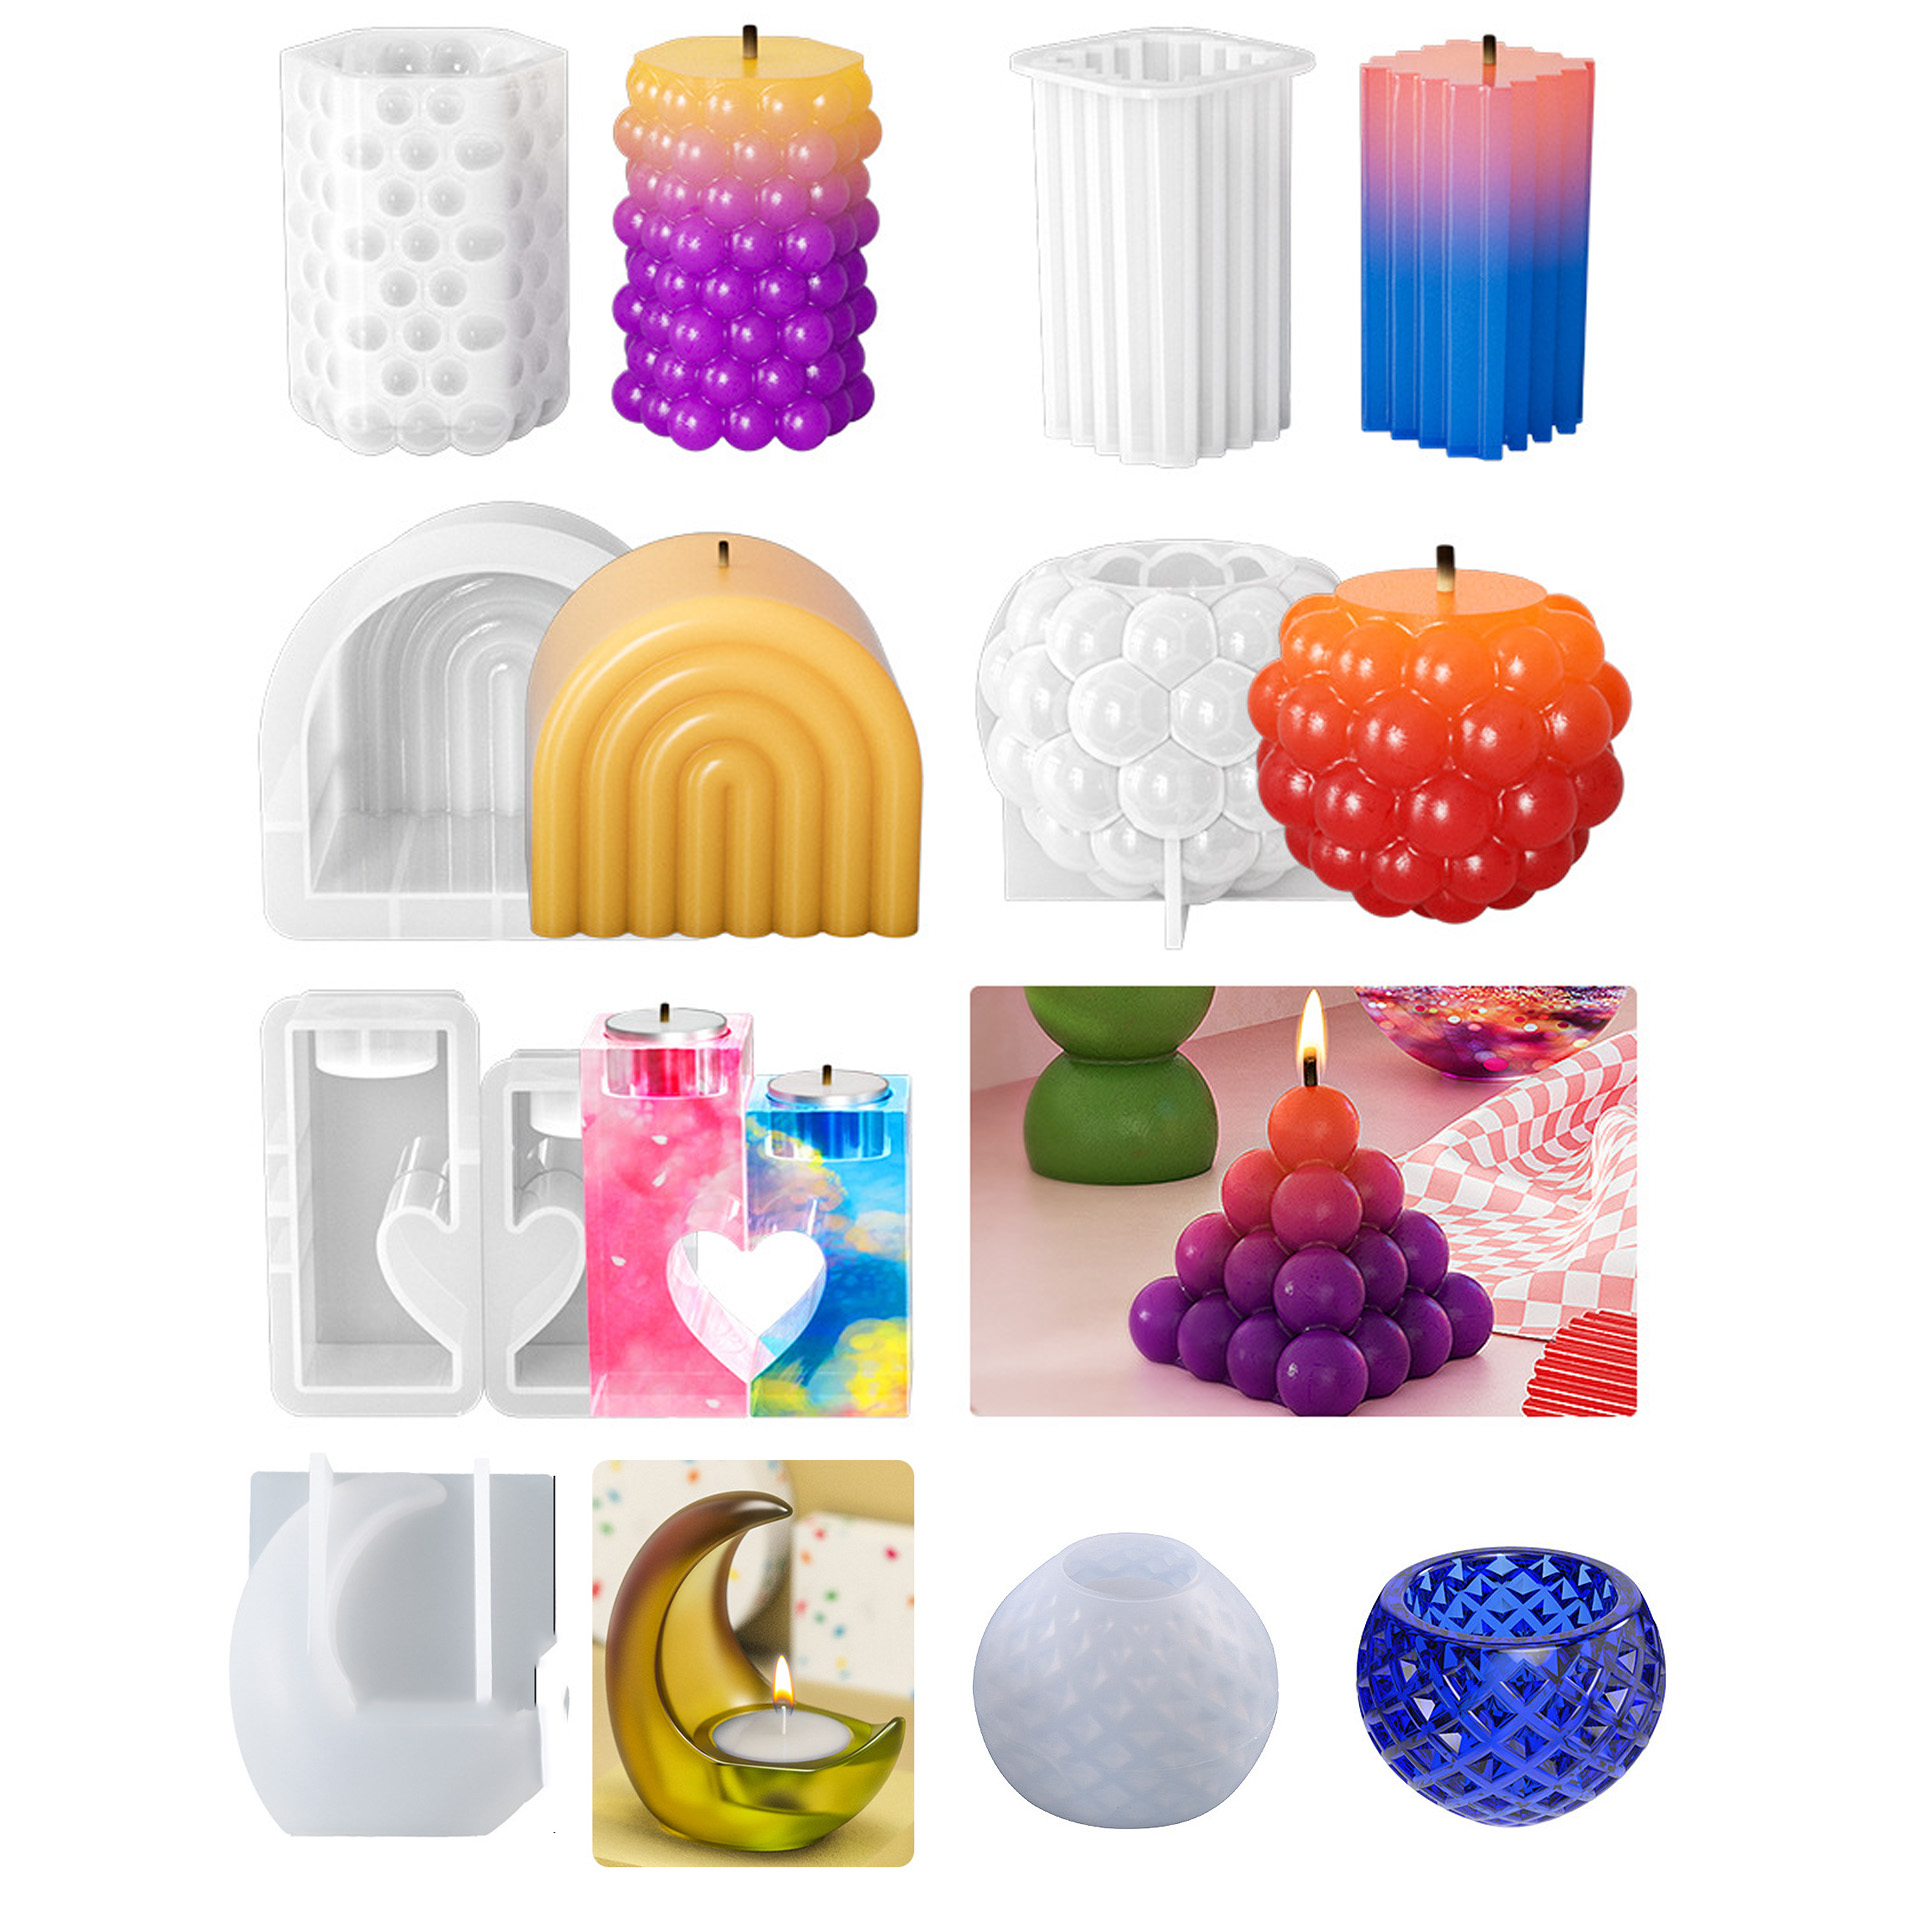 Clay Molding Tools Form For Candles Silicone Molds Body Candle Making  Supplies 3d Mold Silcone Moulds Soap Products Wax Silicon Mould Crafts From  Rubibegone, $6.98